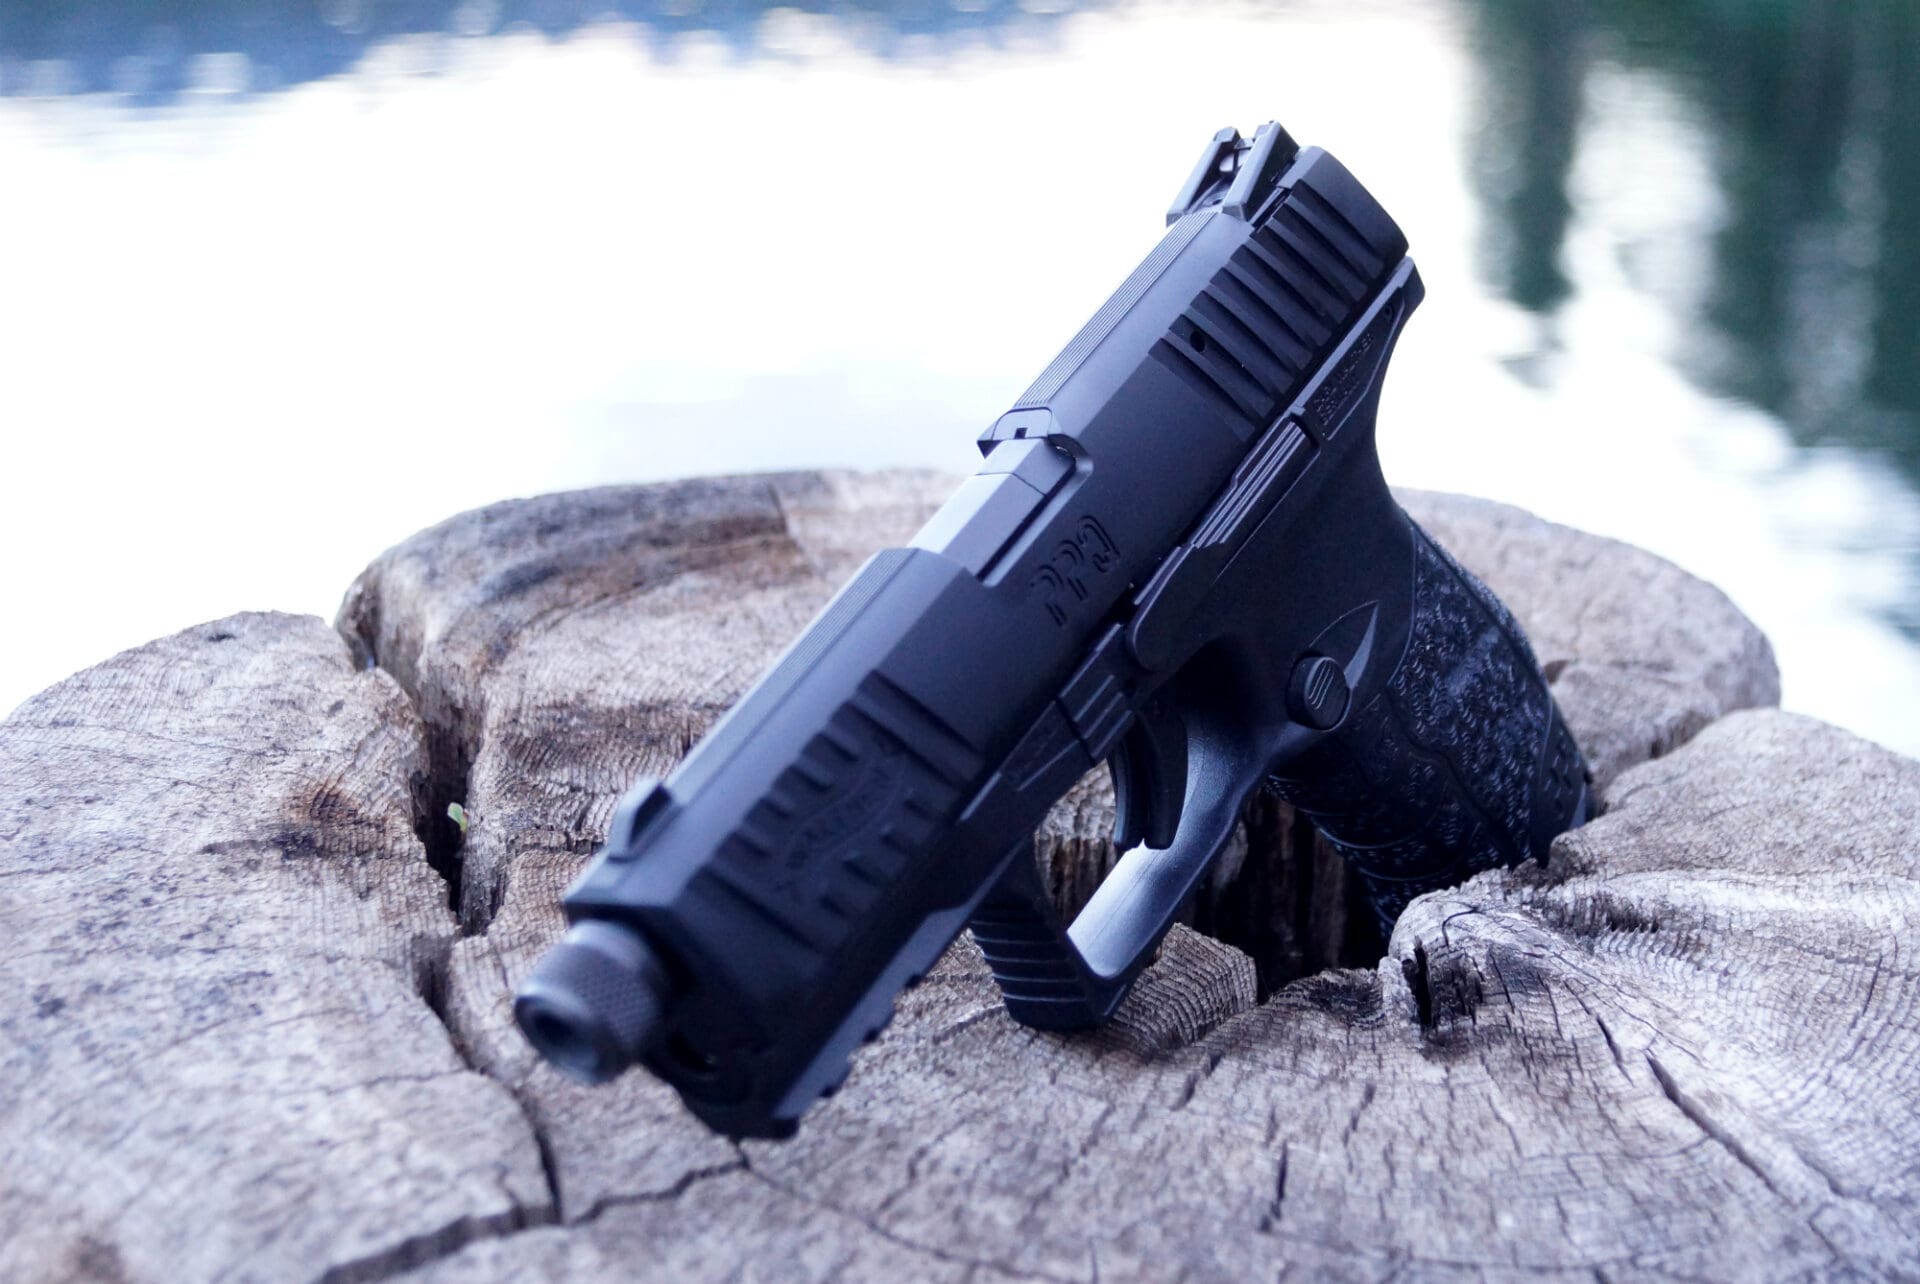 Gun Review: Walther PPQ M2 .22 LR.